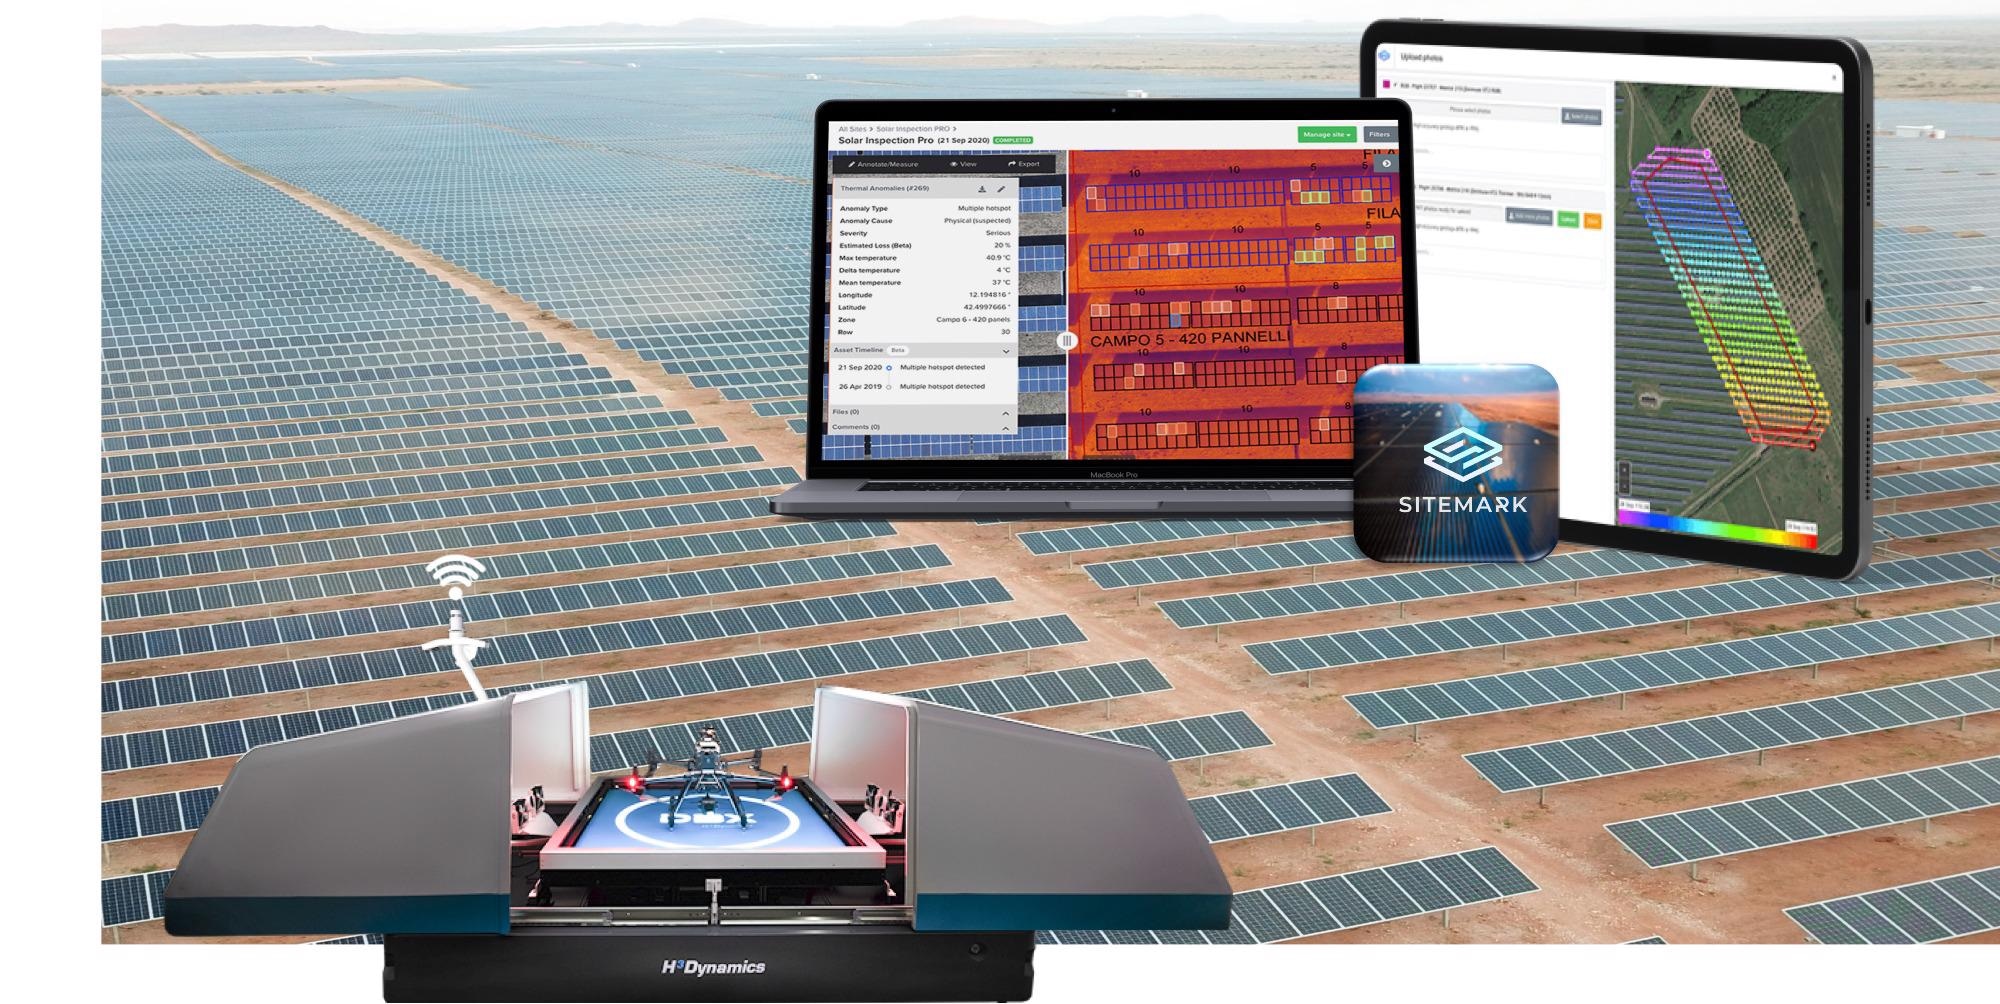 H3 Dynamics Launches Autonomous Drone Stations to Help Monitor Large Solar Farms